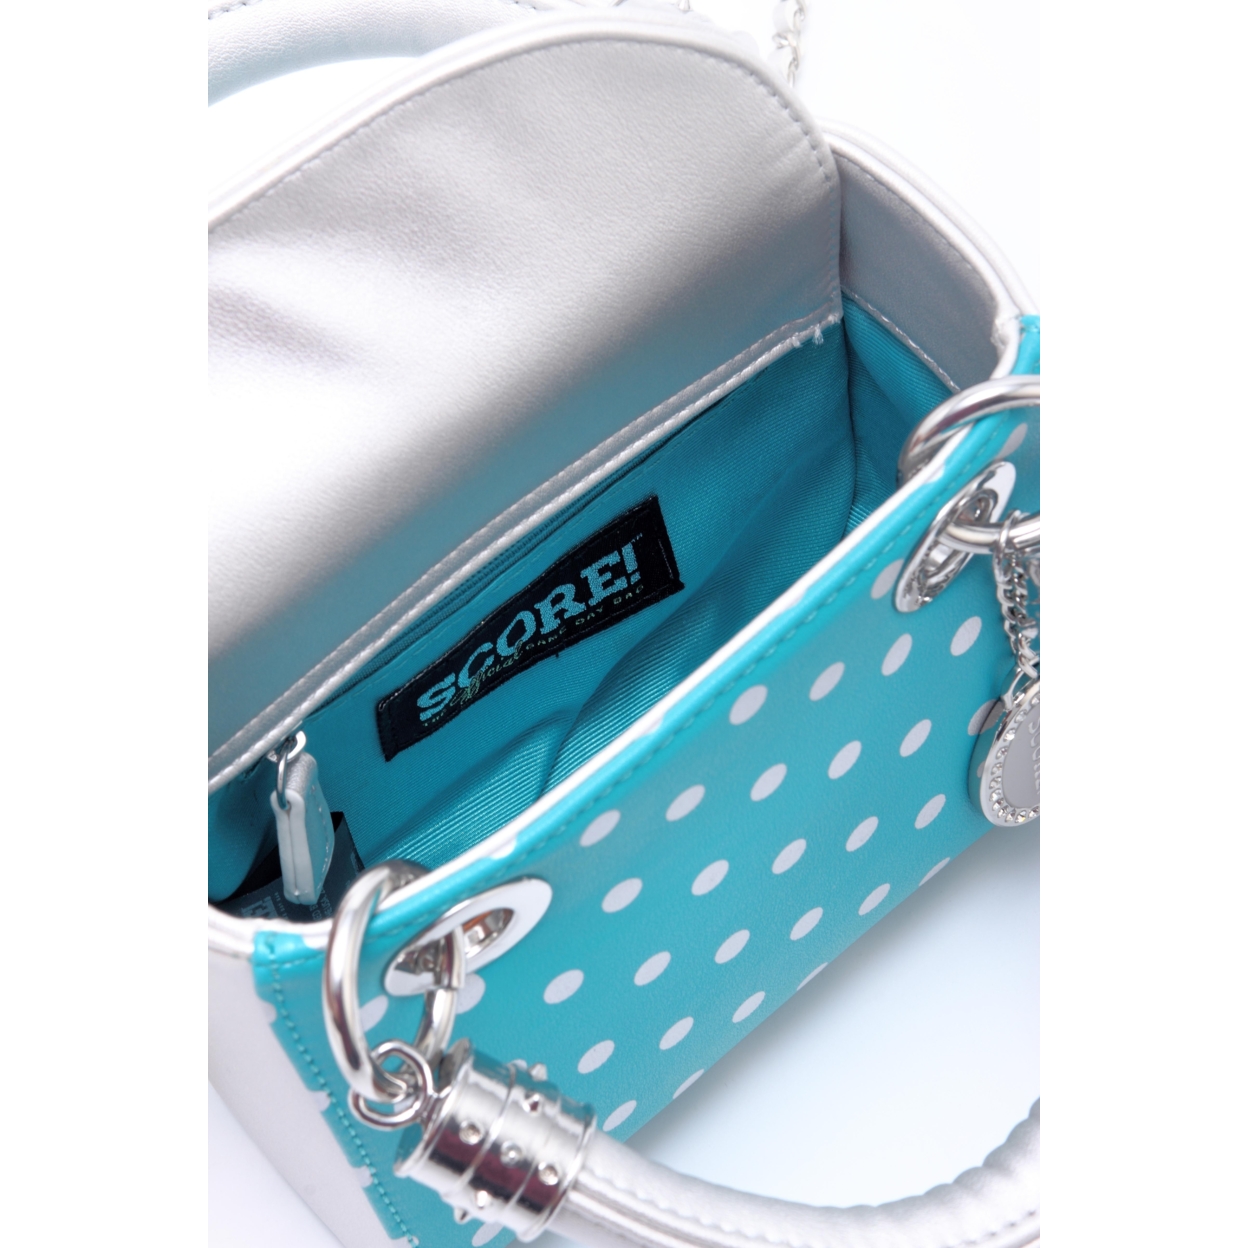 SCORE! Jacqui Classic Top Handle Crossbody Satchel - Turquoise And Silver